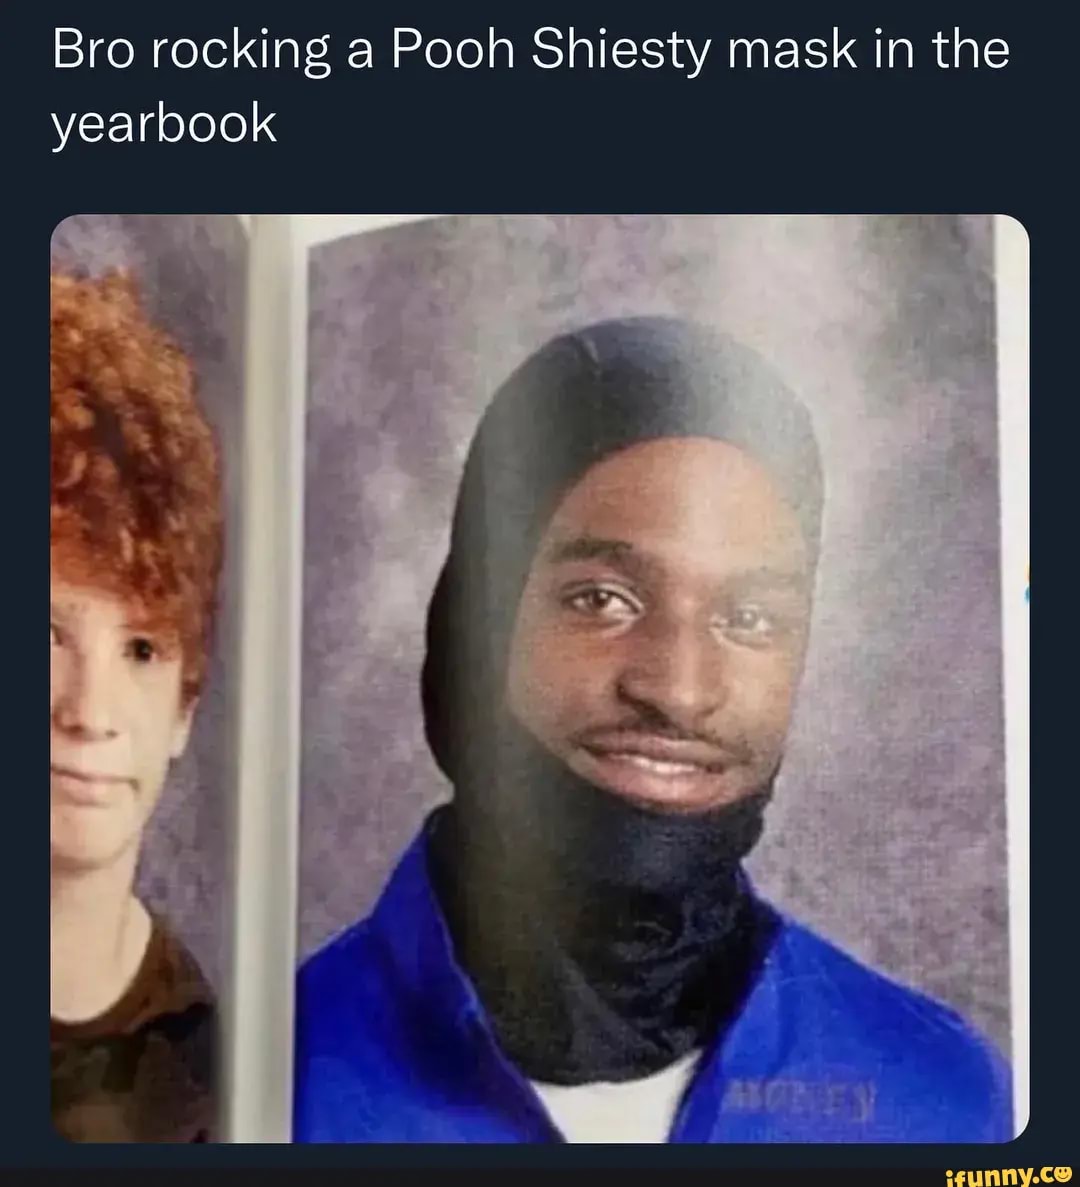 Bro rocking a Pooh Shiesty mask in the yearbook - iFunny Brazil